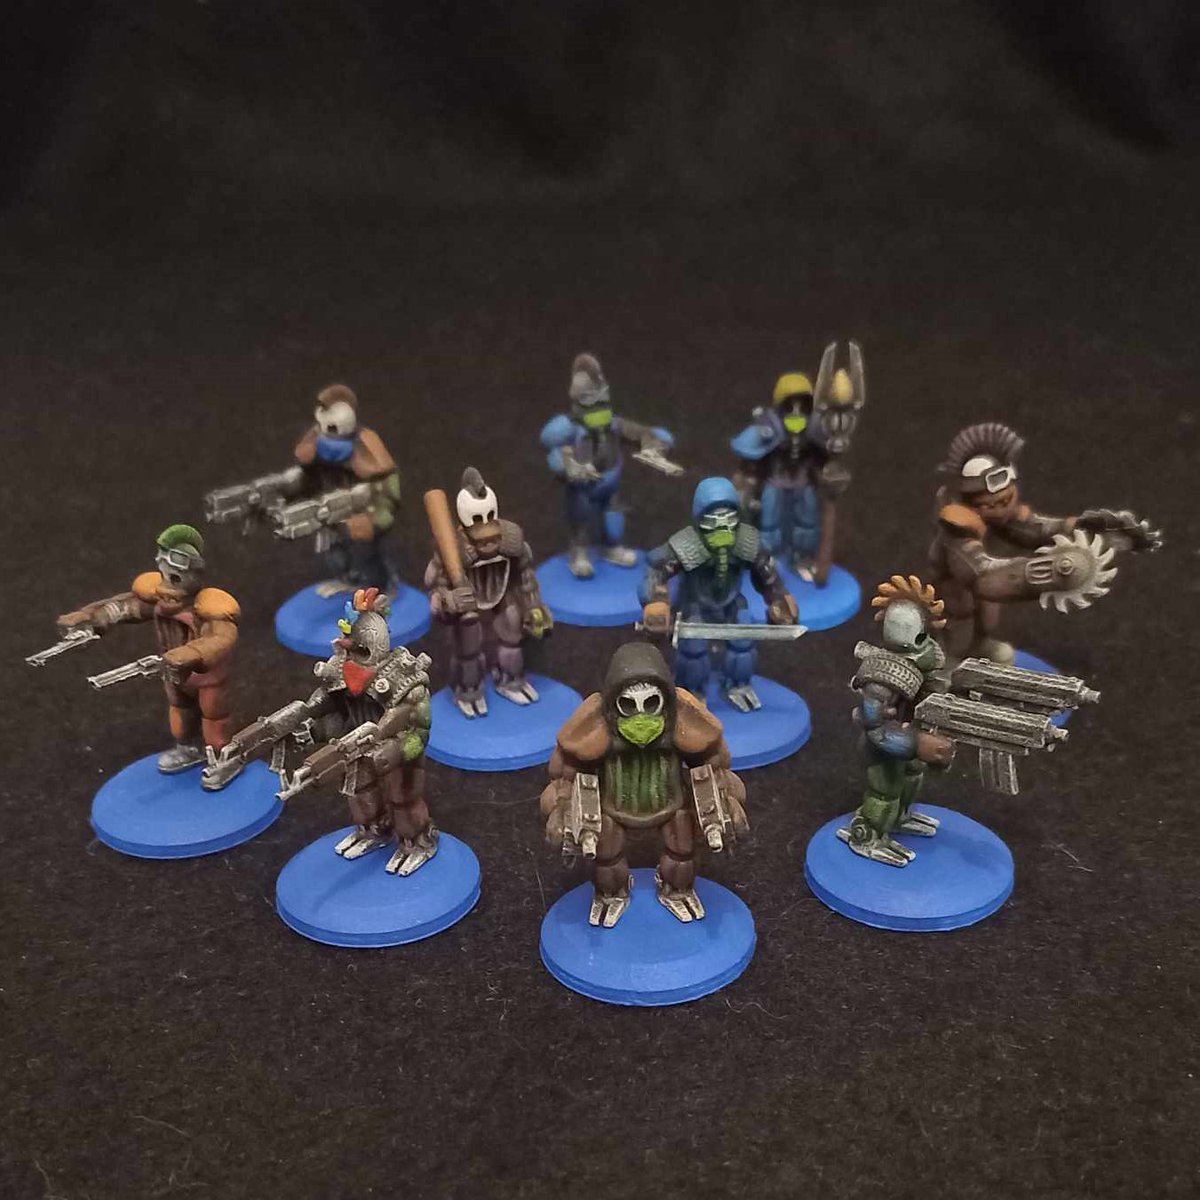 Blue team ready.

#forthegoldenegg #ibeliveicanfly #betabots #robot #robots #punk #scifi #scifiart #tabletop #tabletopgames #tabletopminiature #tabletopwargaming #wargame #wargames #wargaming #miniature #miniaturepainting #minipainting #3dprinting #3dprintingideas